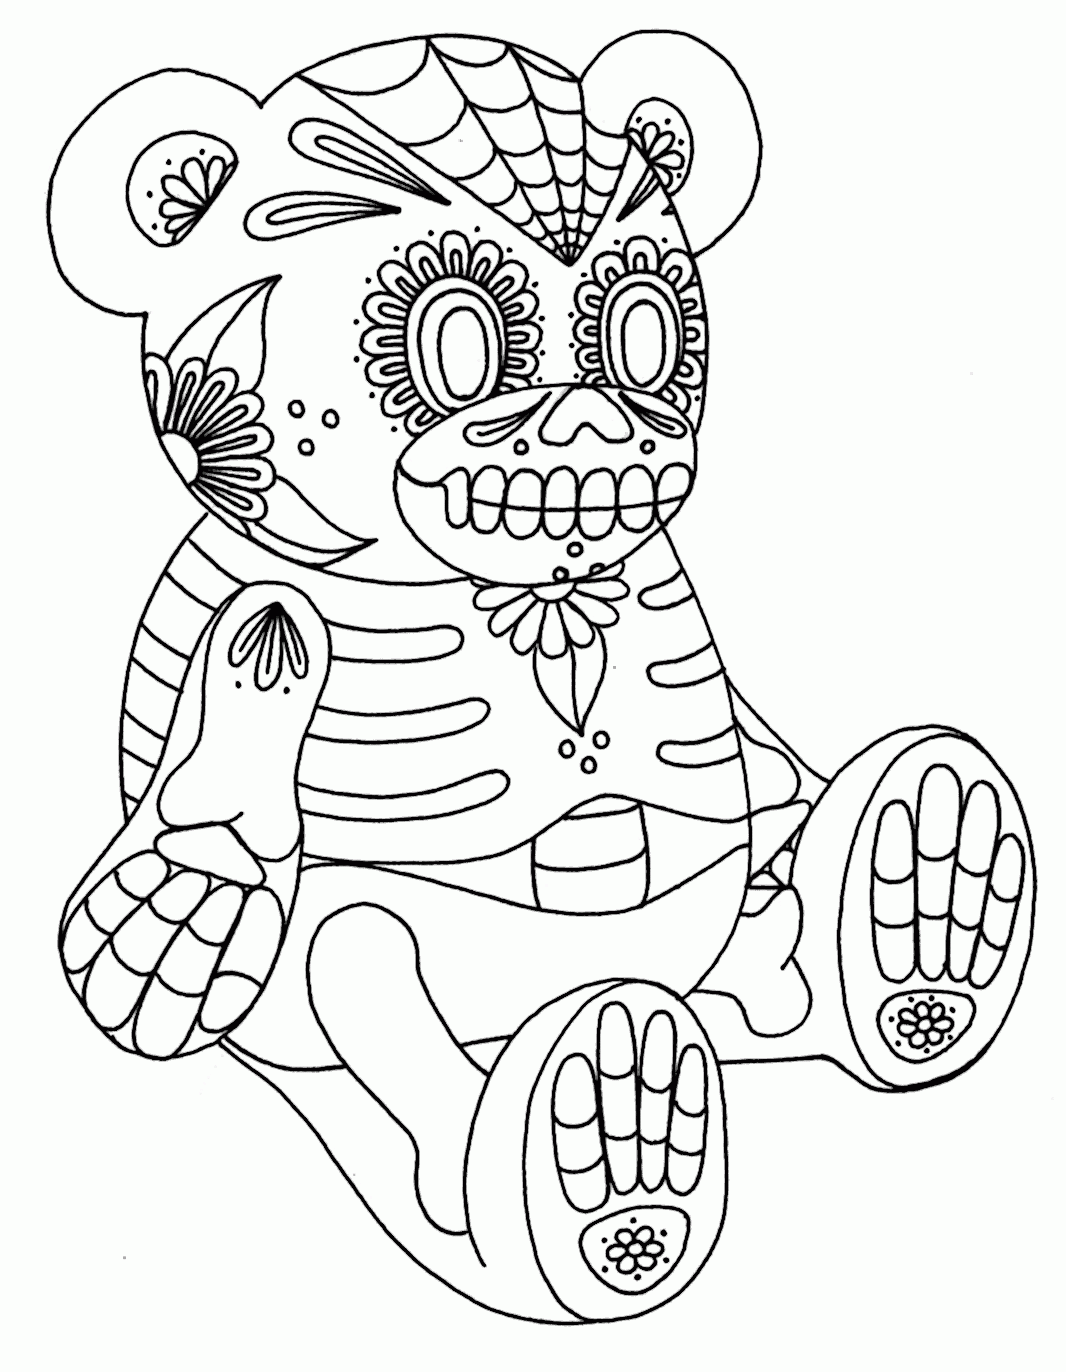 13 Pics of Awesome Skull Coloring Pages - Printable Adult Coloring ...